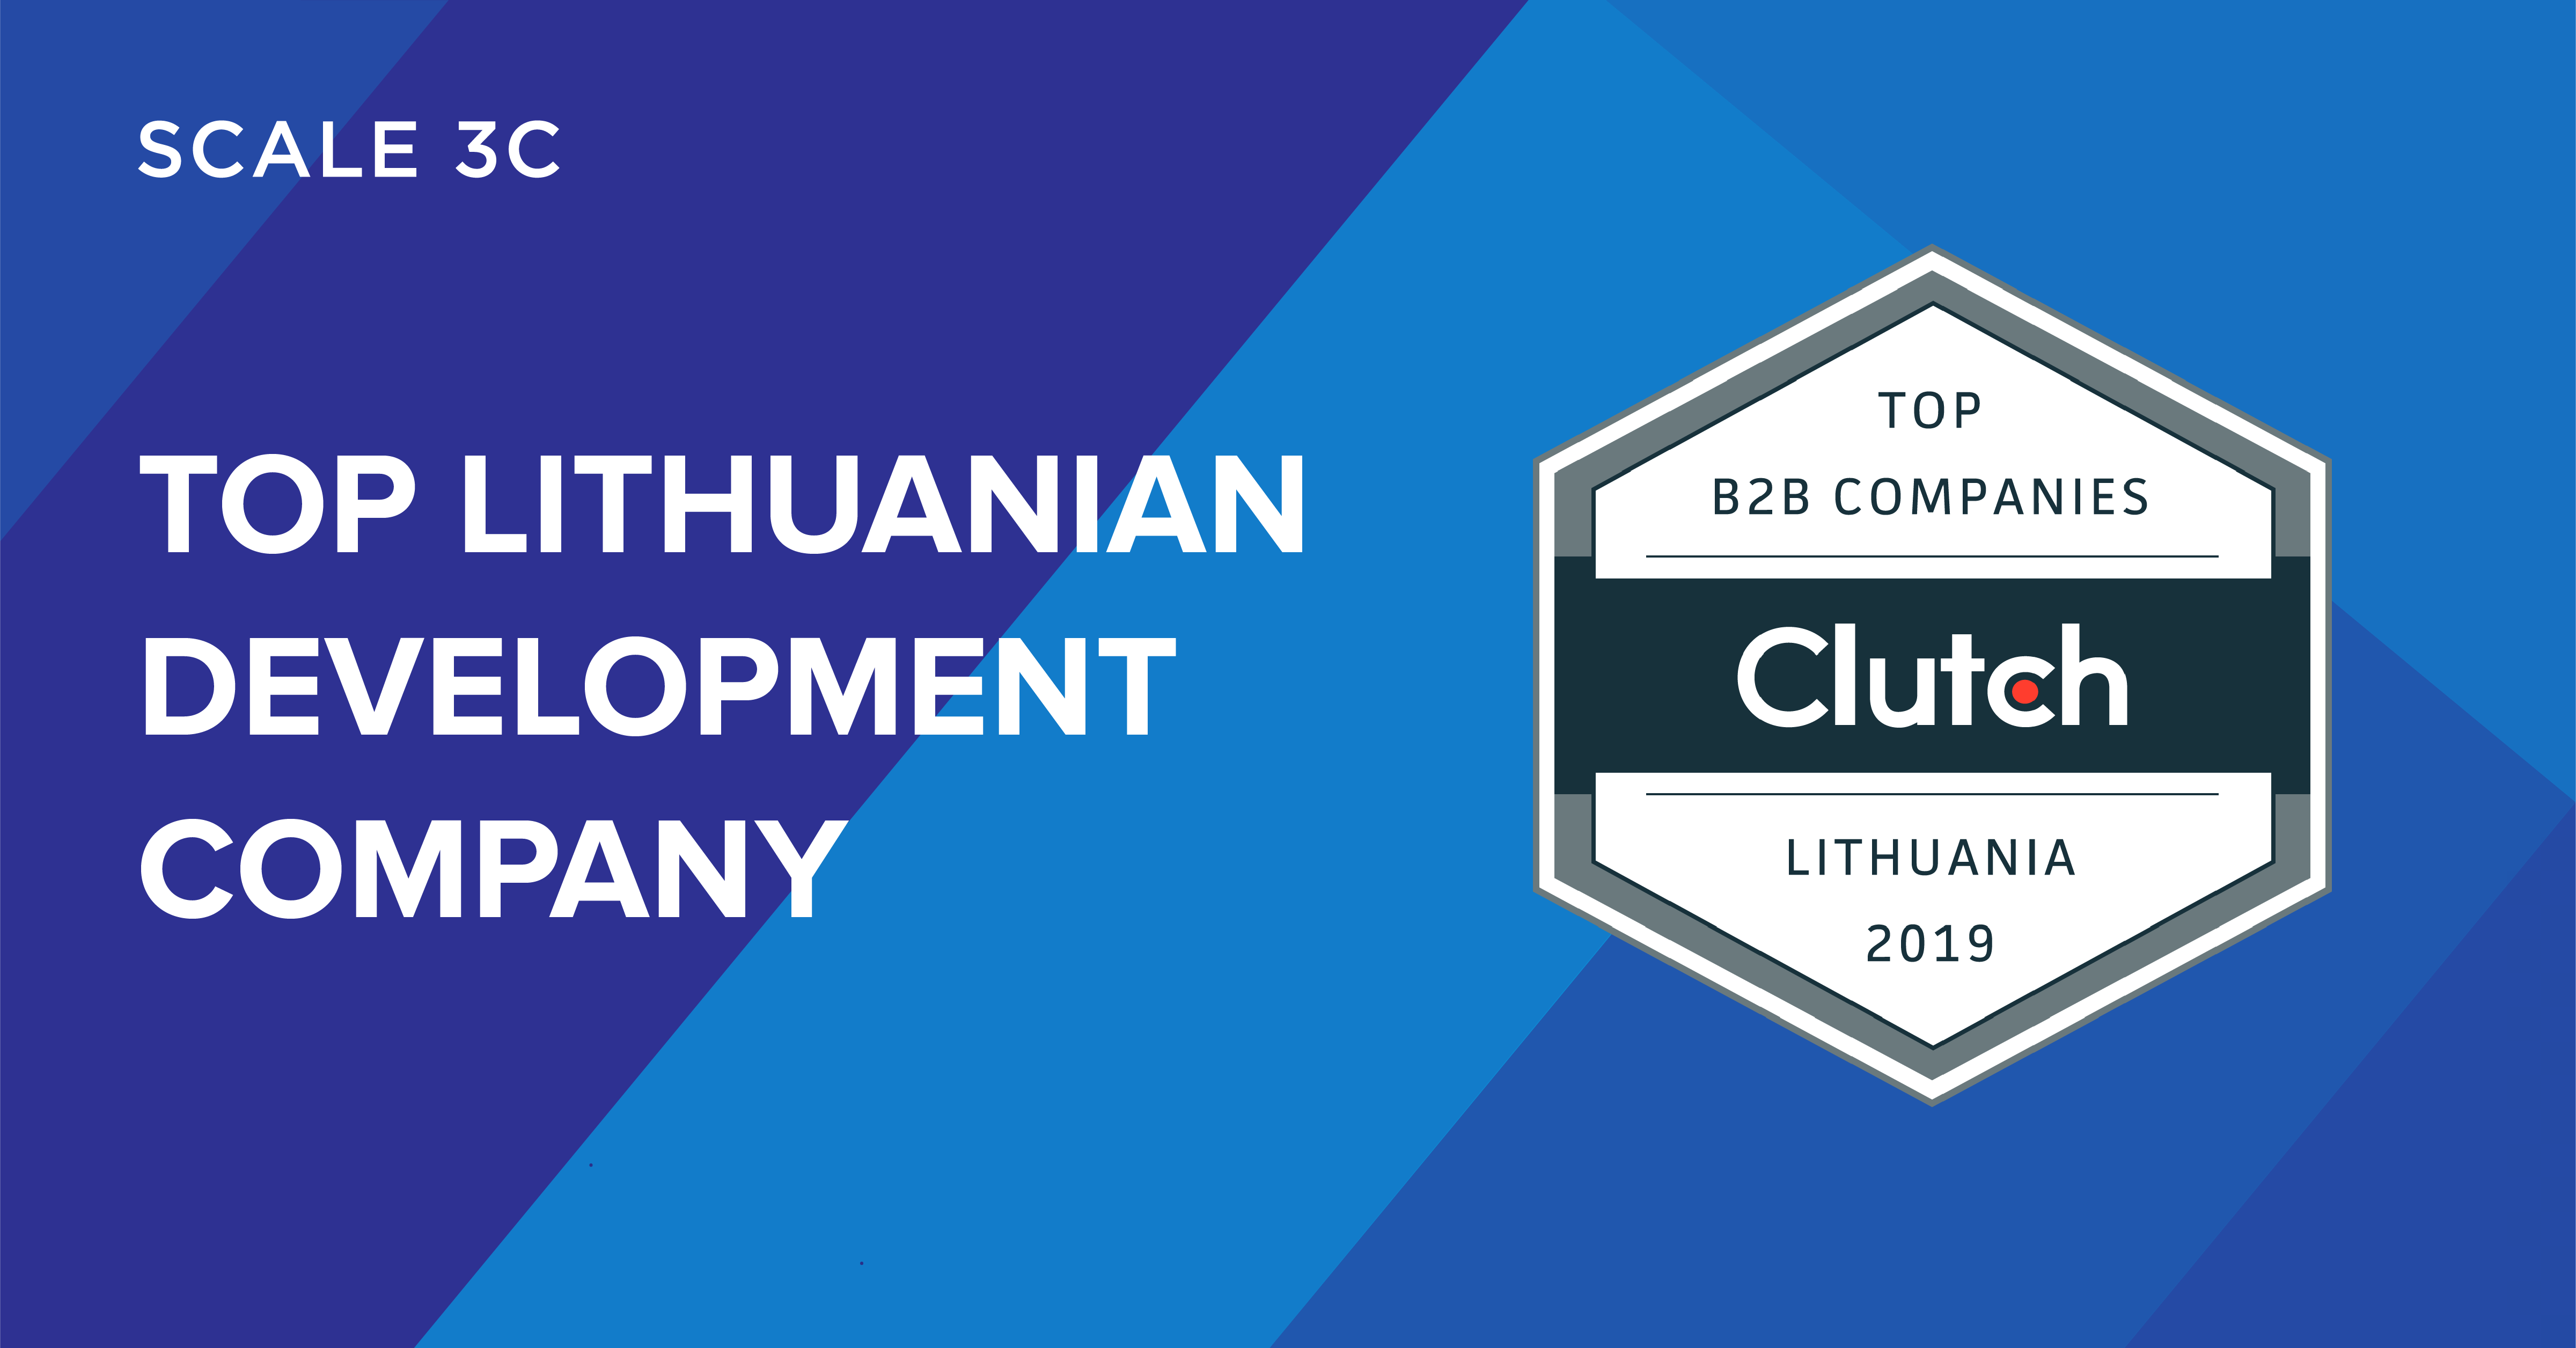 Clutch names Scale3C a Top development company in Lithuania